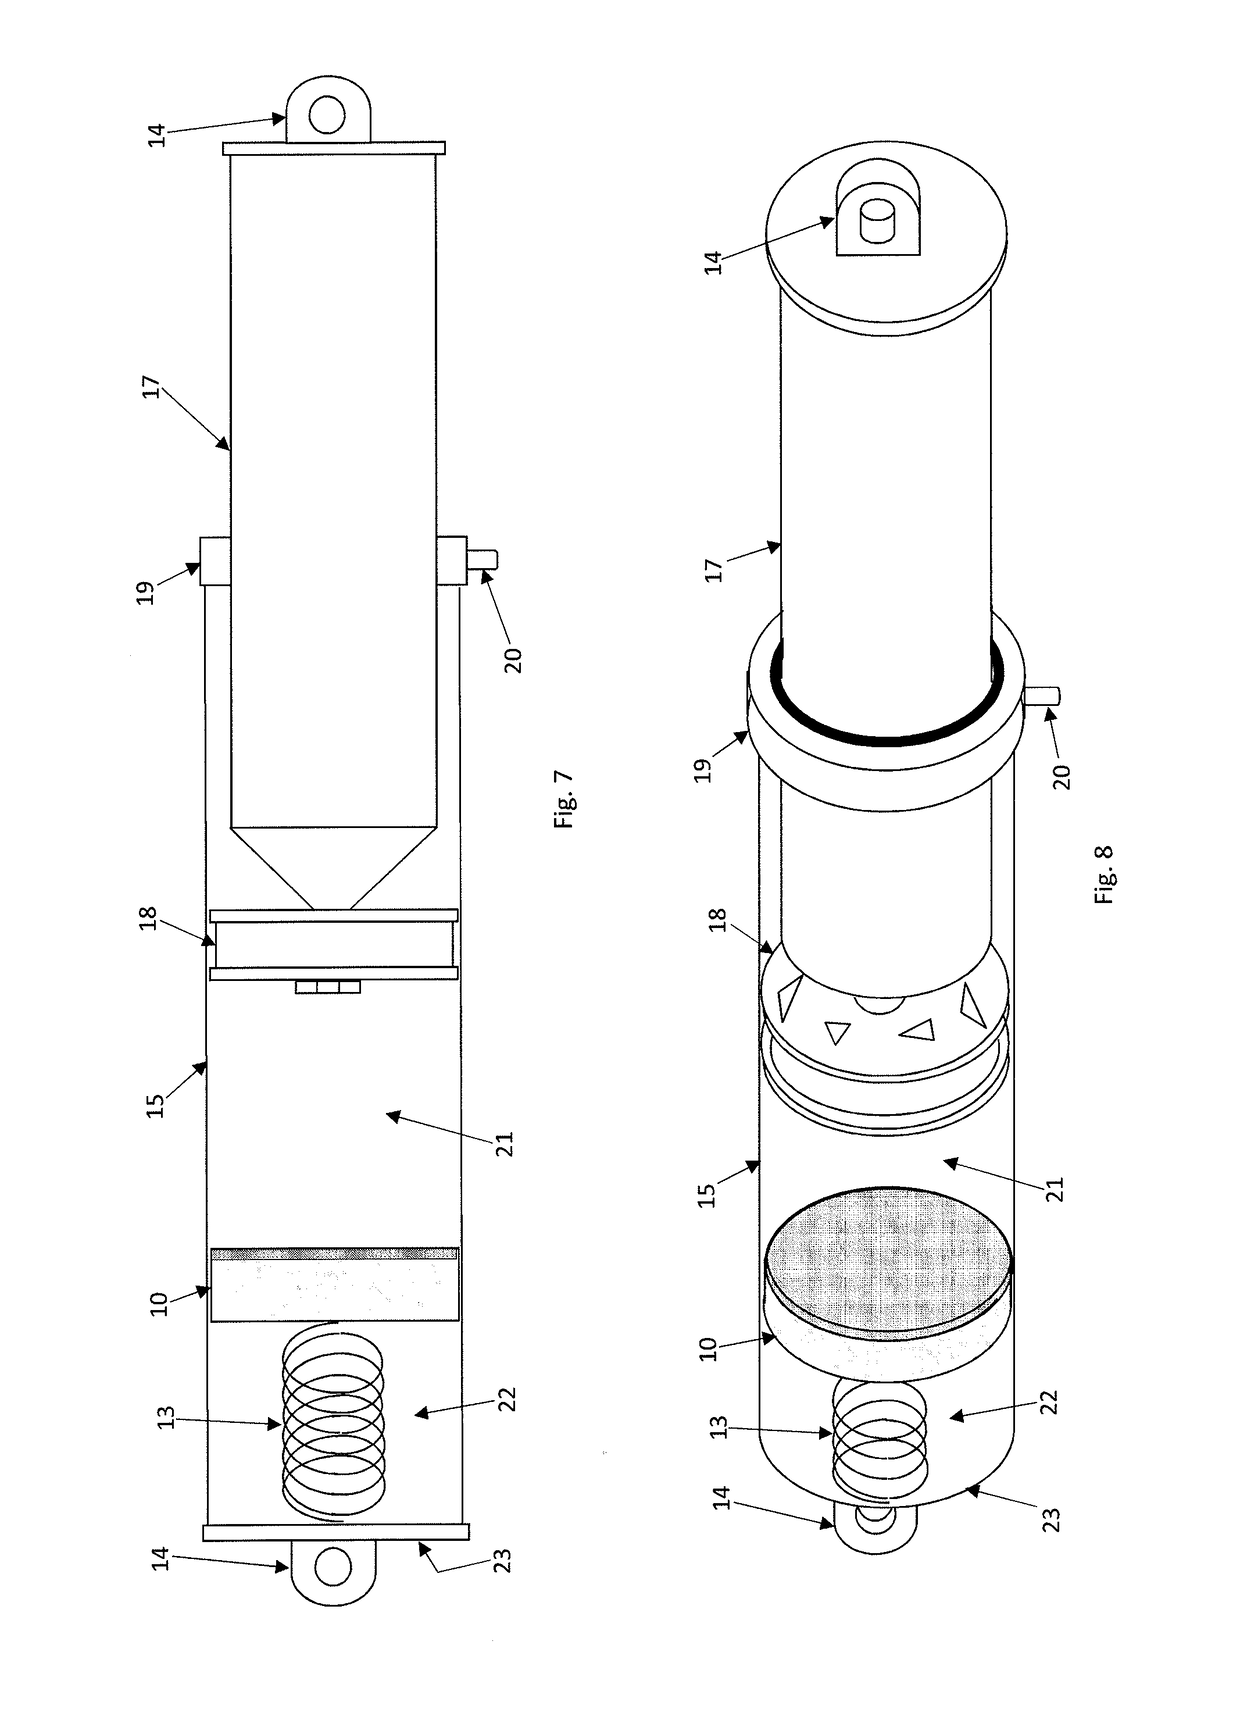 Shock Absorber with Gas Permeable Internal Floating Piston